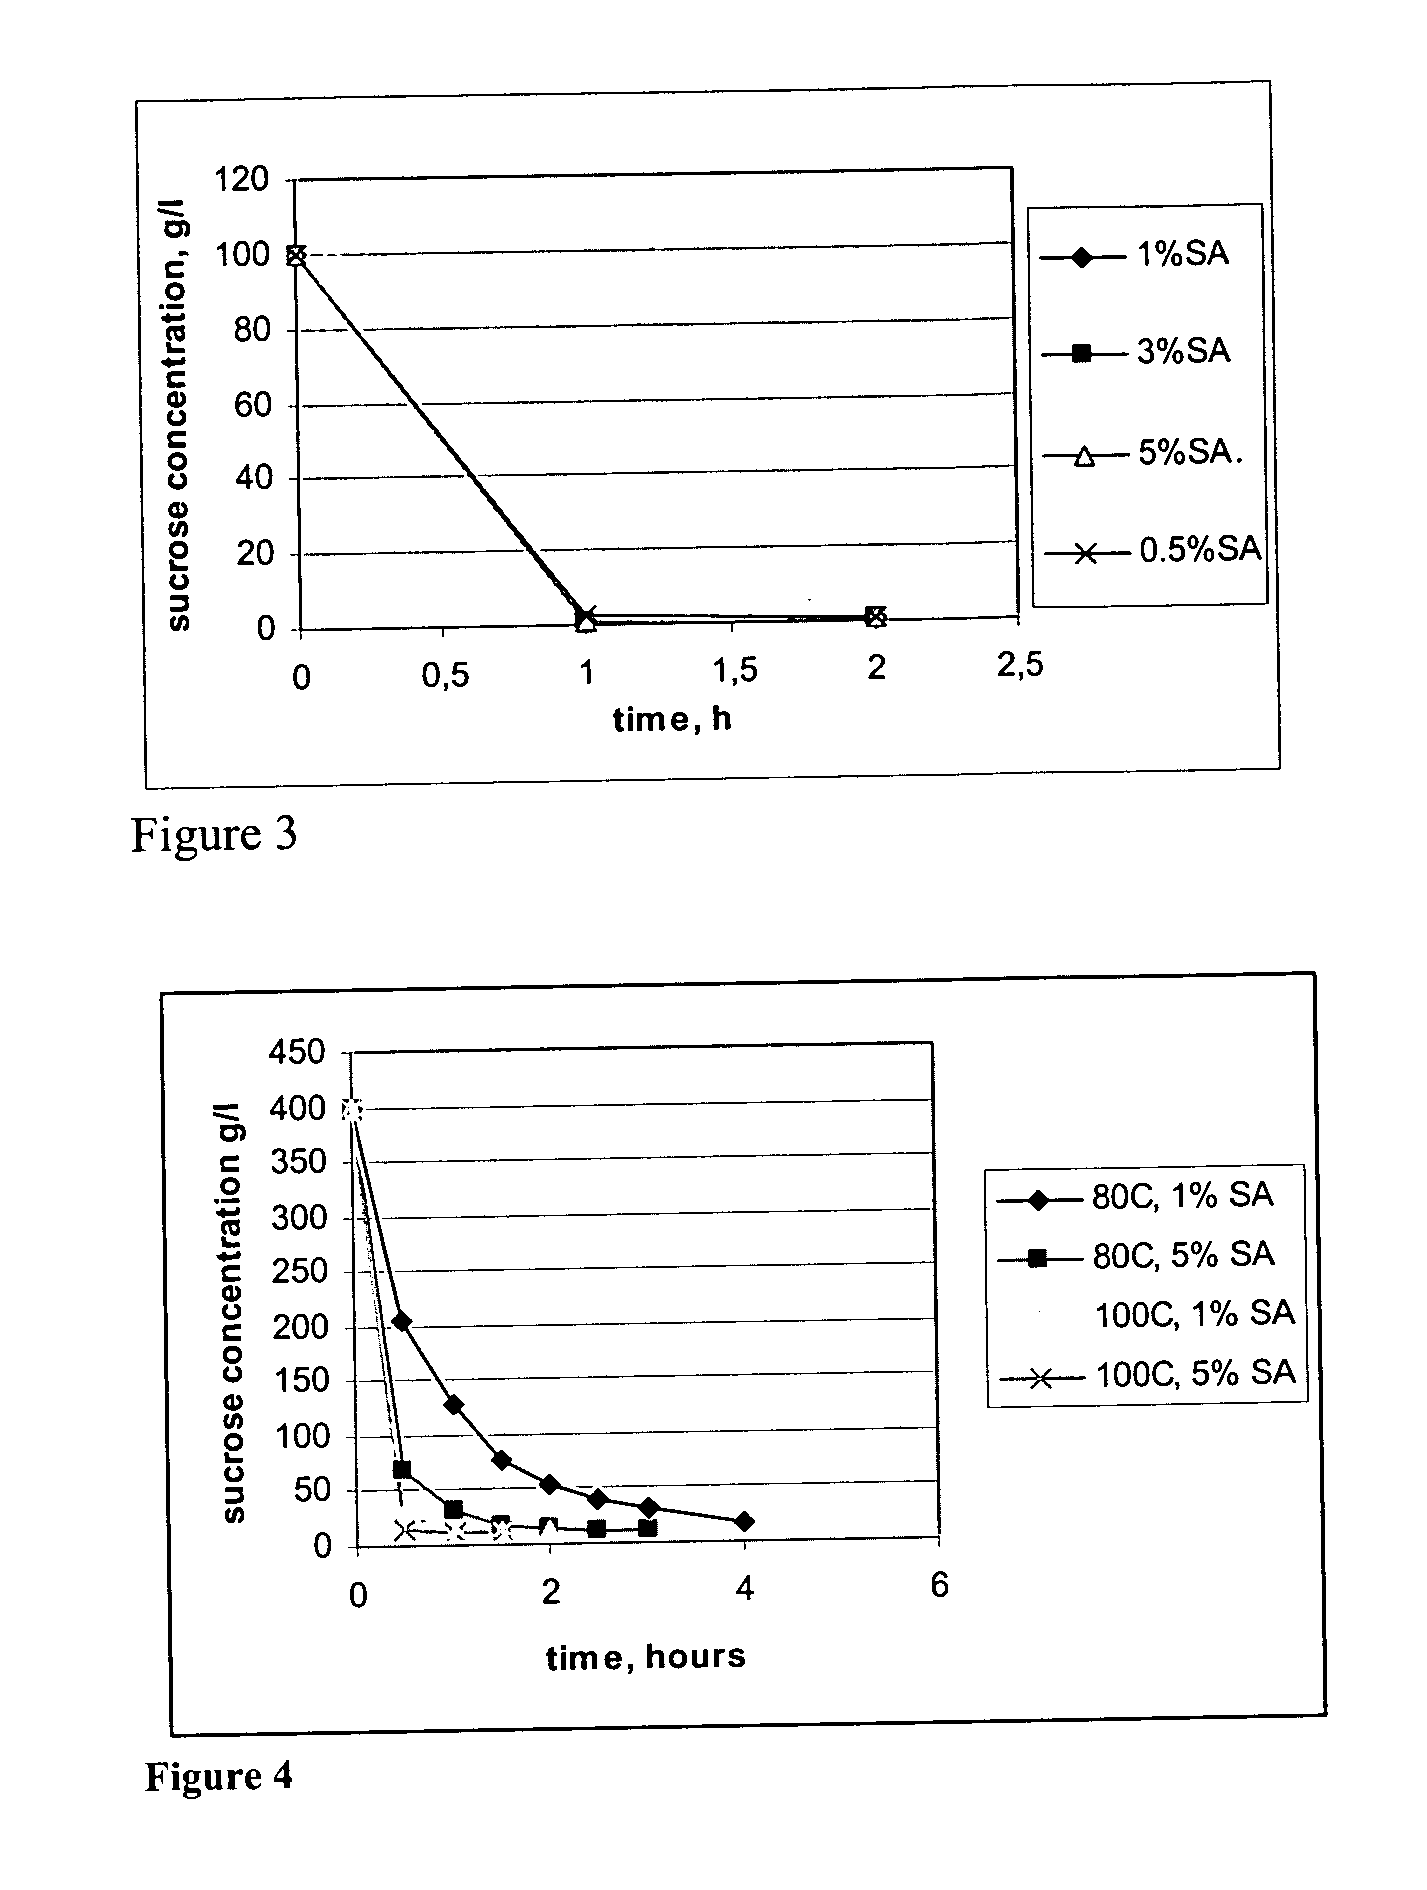 Process for producing succinic acid from sucrose